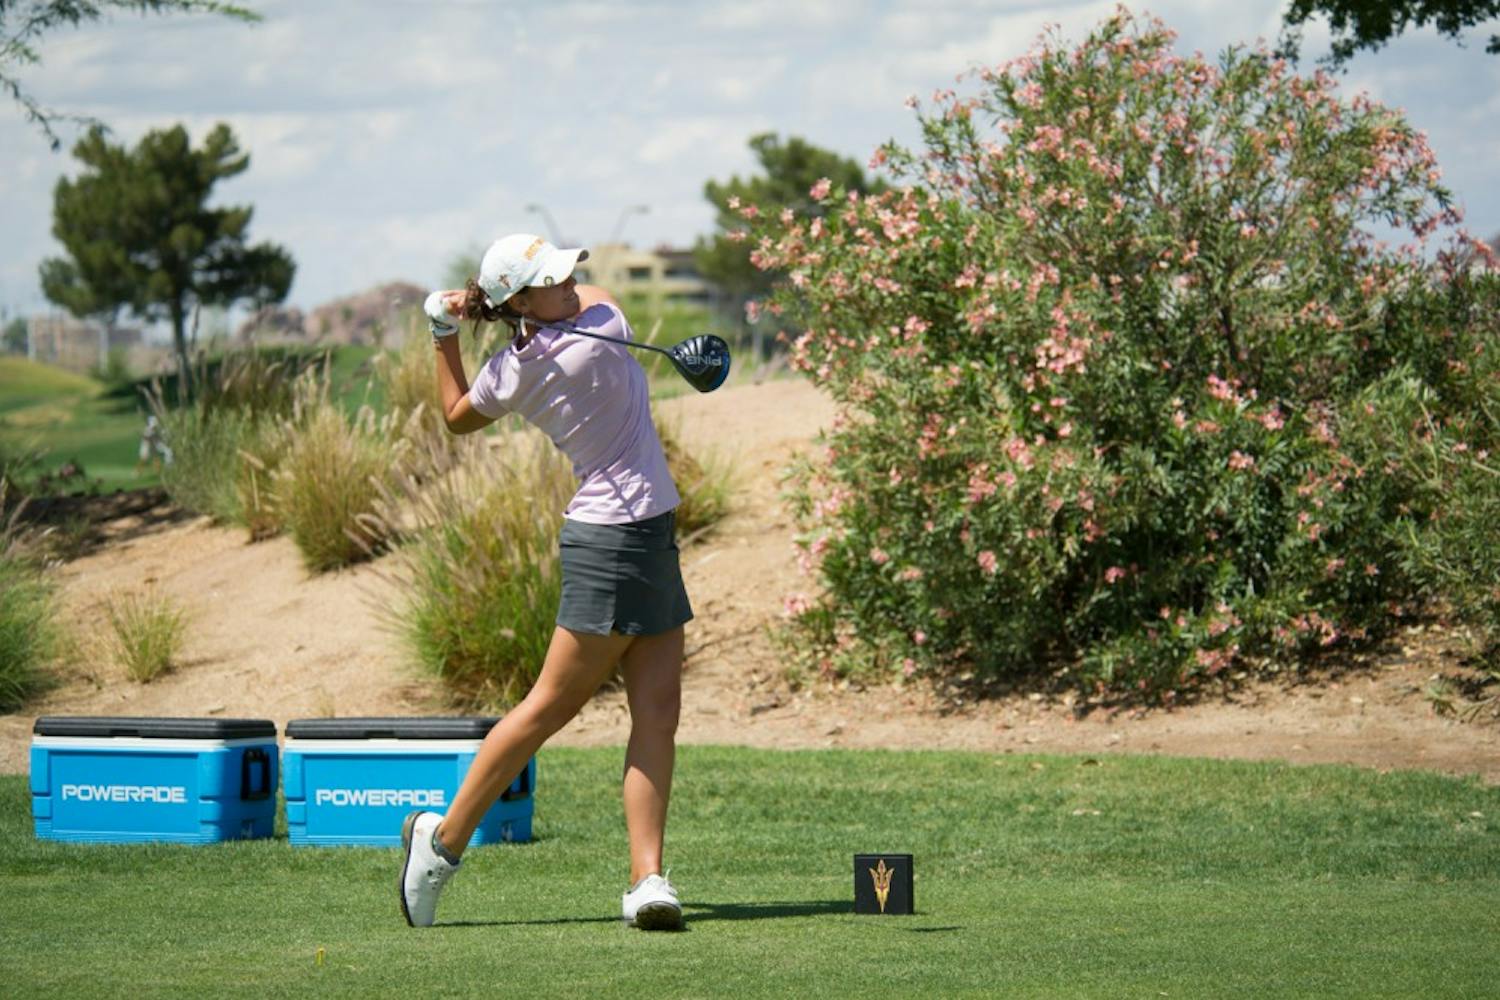 Roberta Liti tees off from the 5th tee box on Friday, April 8, 2016 during the 2016 Ping ASU Invitational at Karsten Golf Course in Tempe, Arizona.